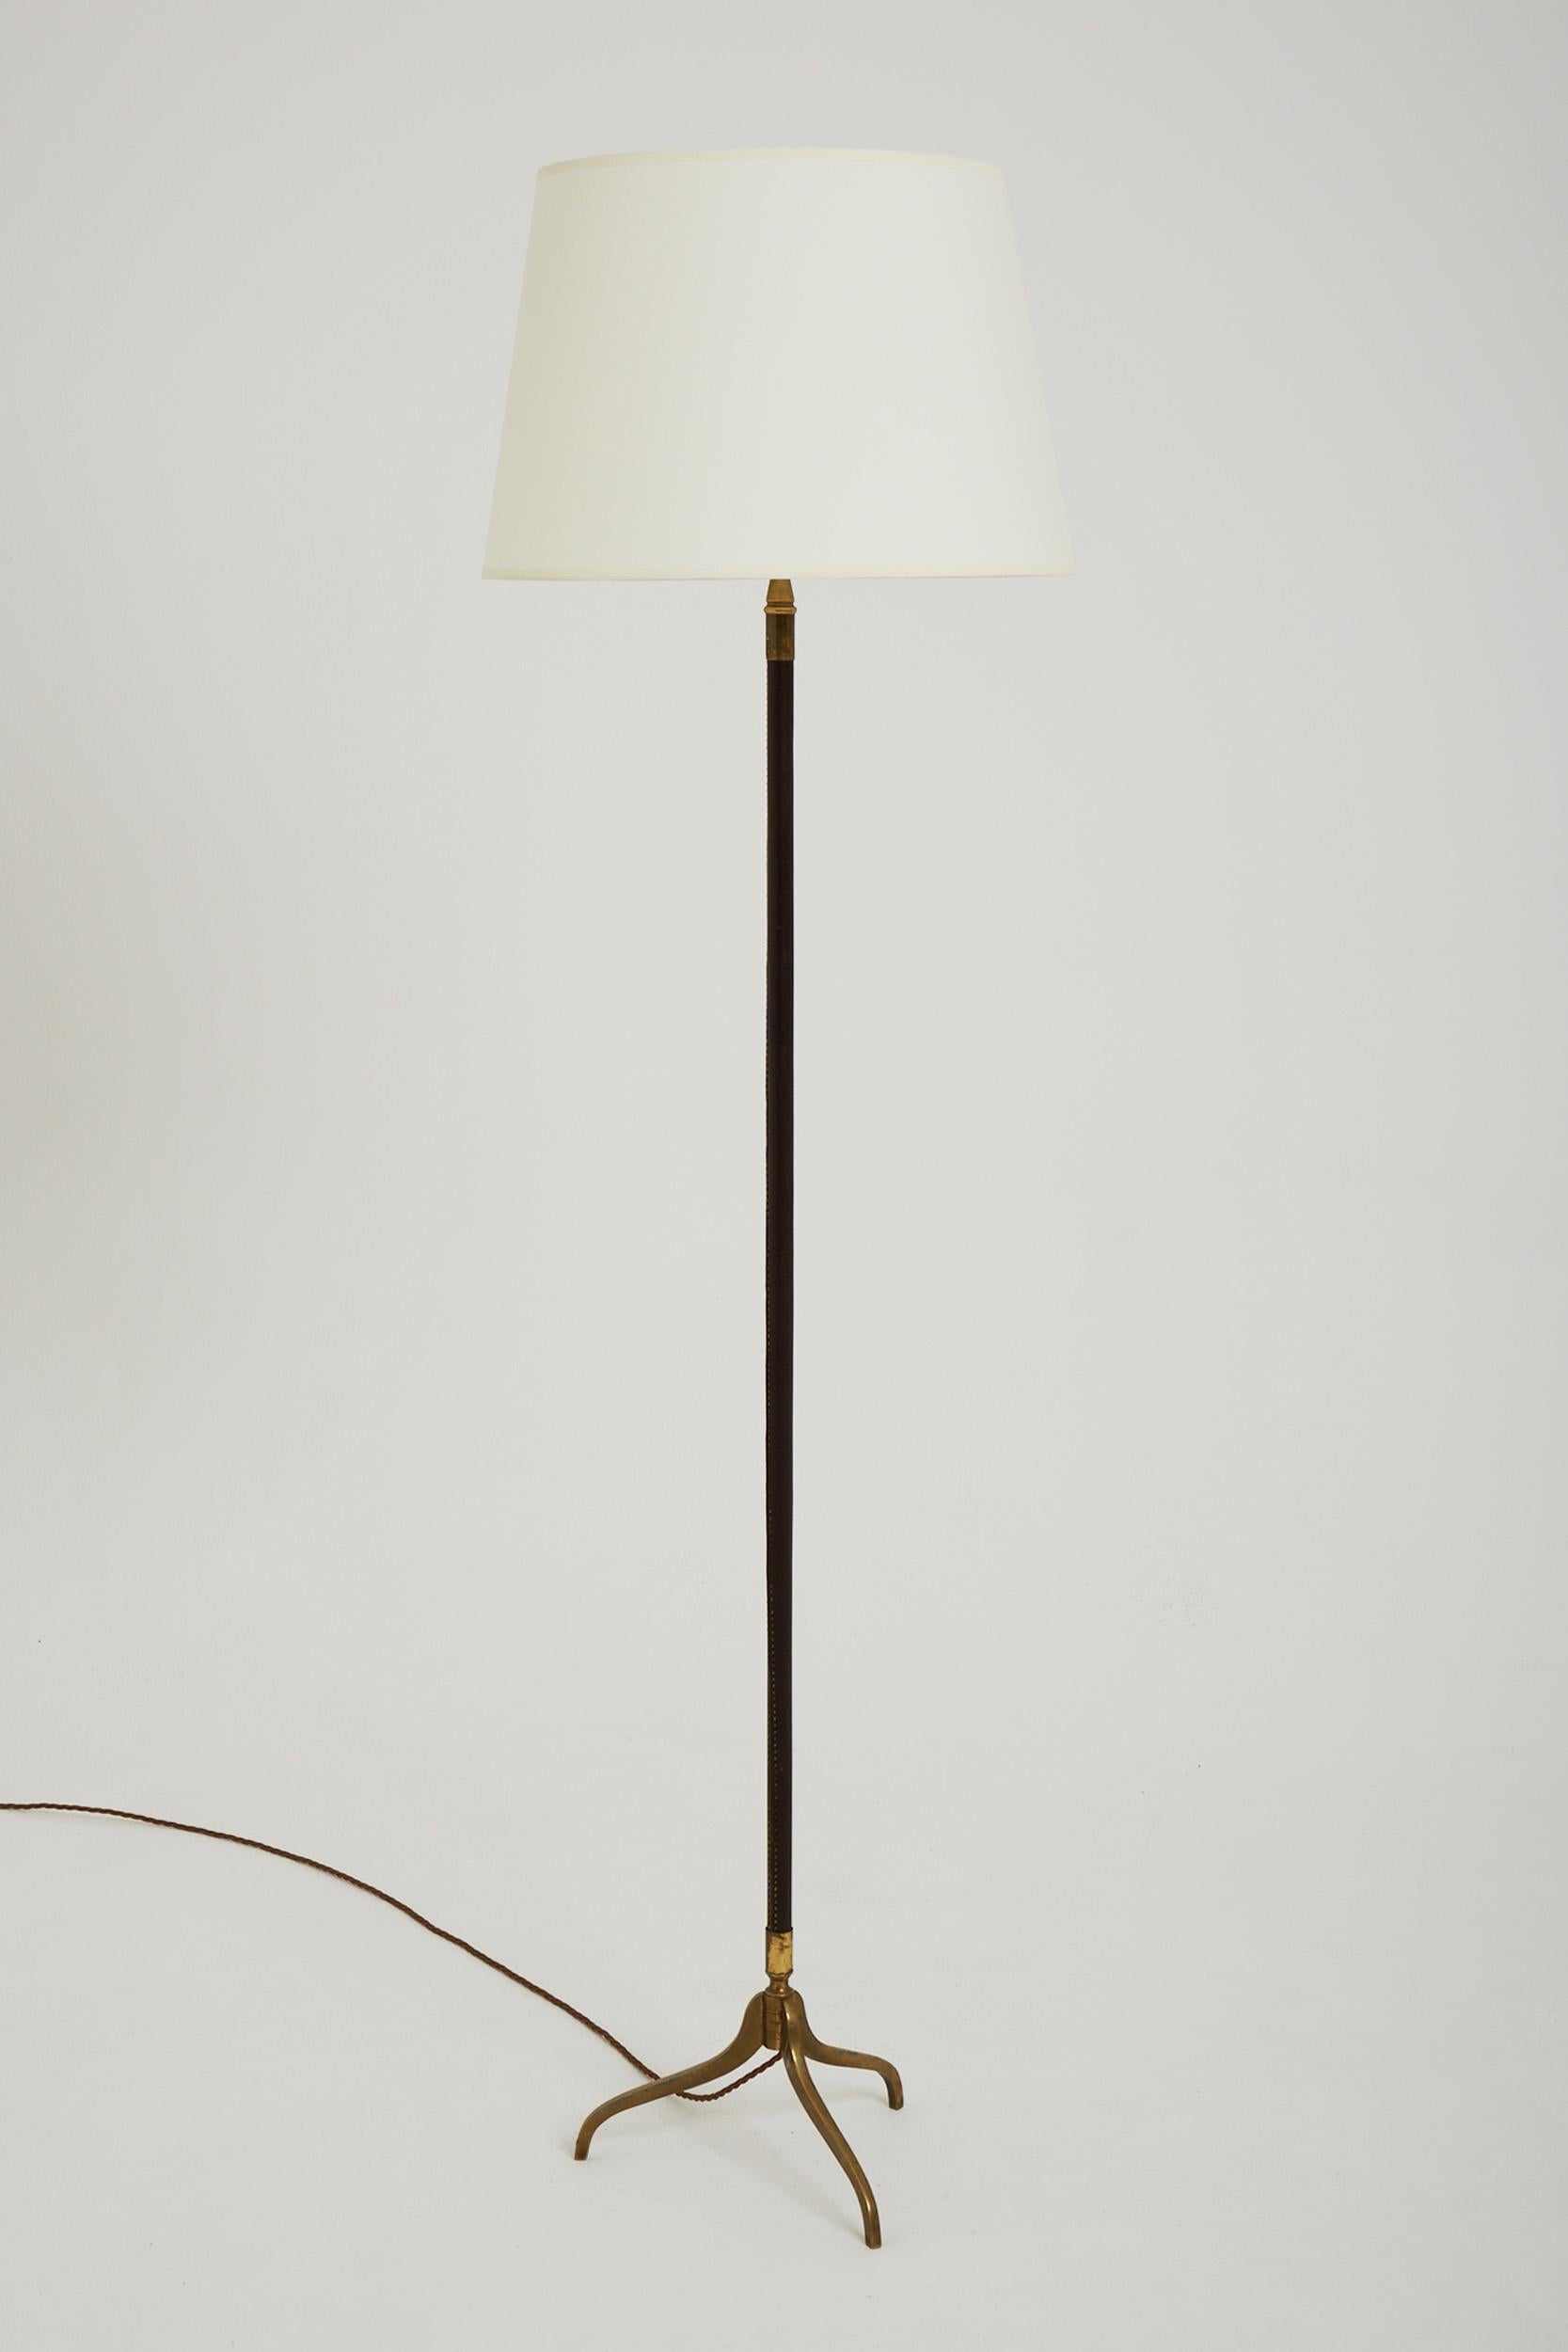 A saddle-stitched dark brown leather and brass tripod floor lamp.
France, Circa 1950.